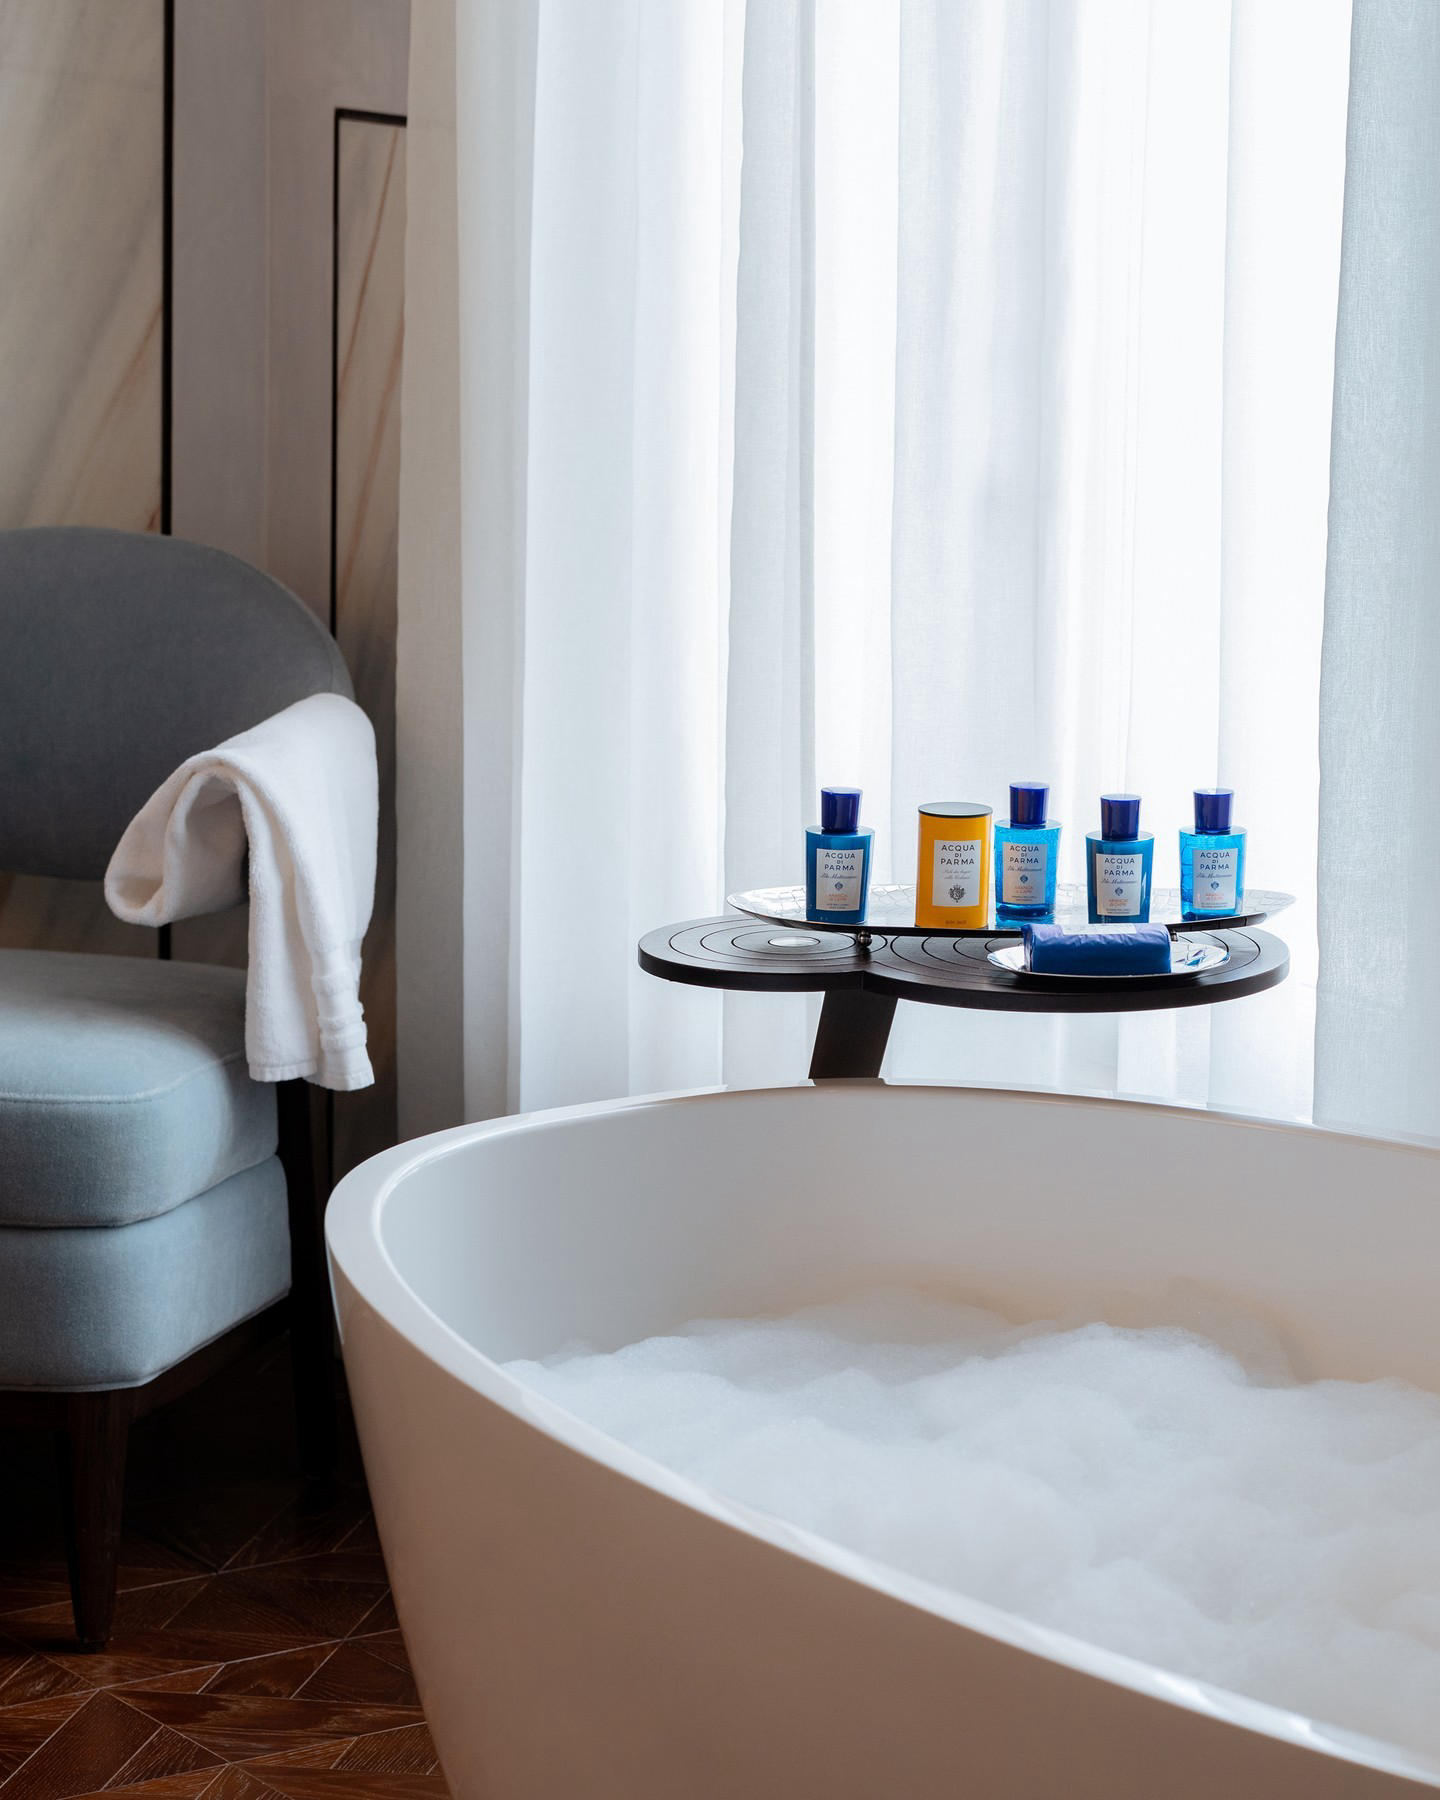 image  1 The St. Regis Venice - Indulge in a bubbly bath experience